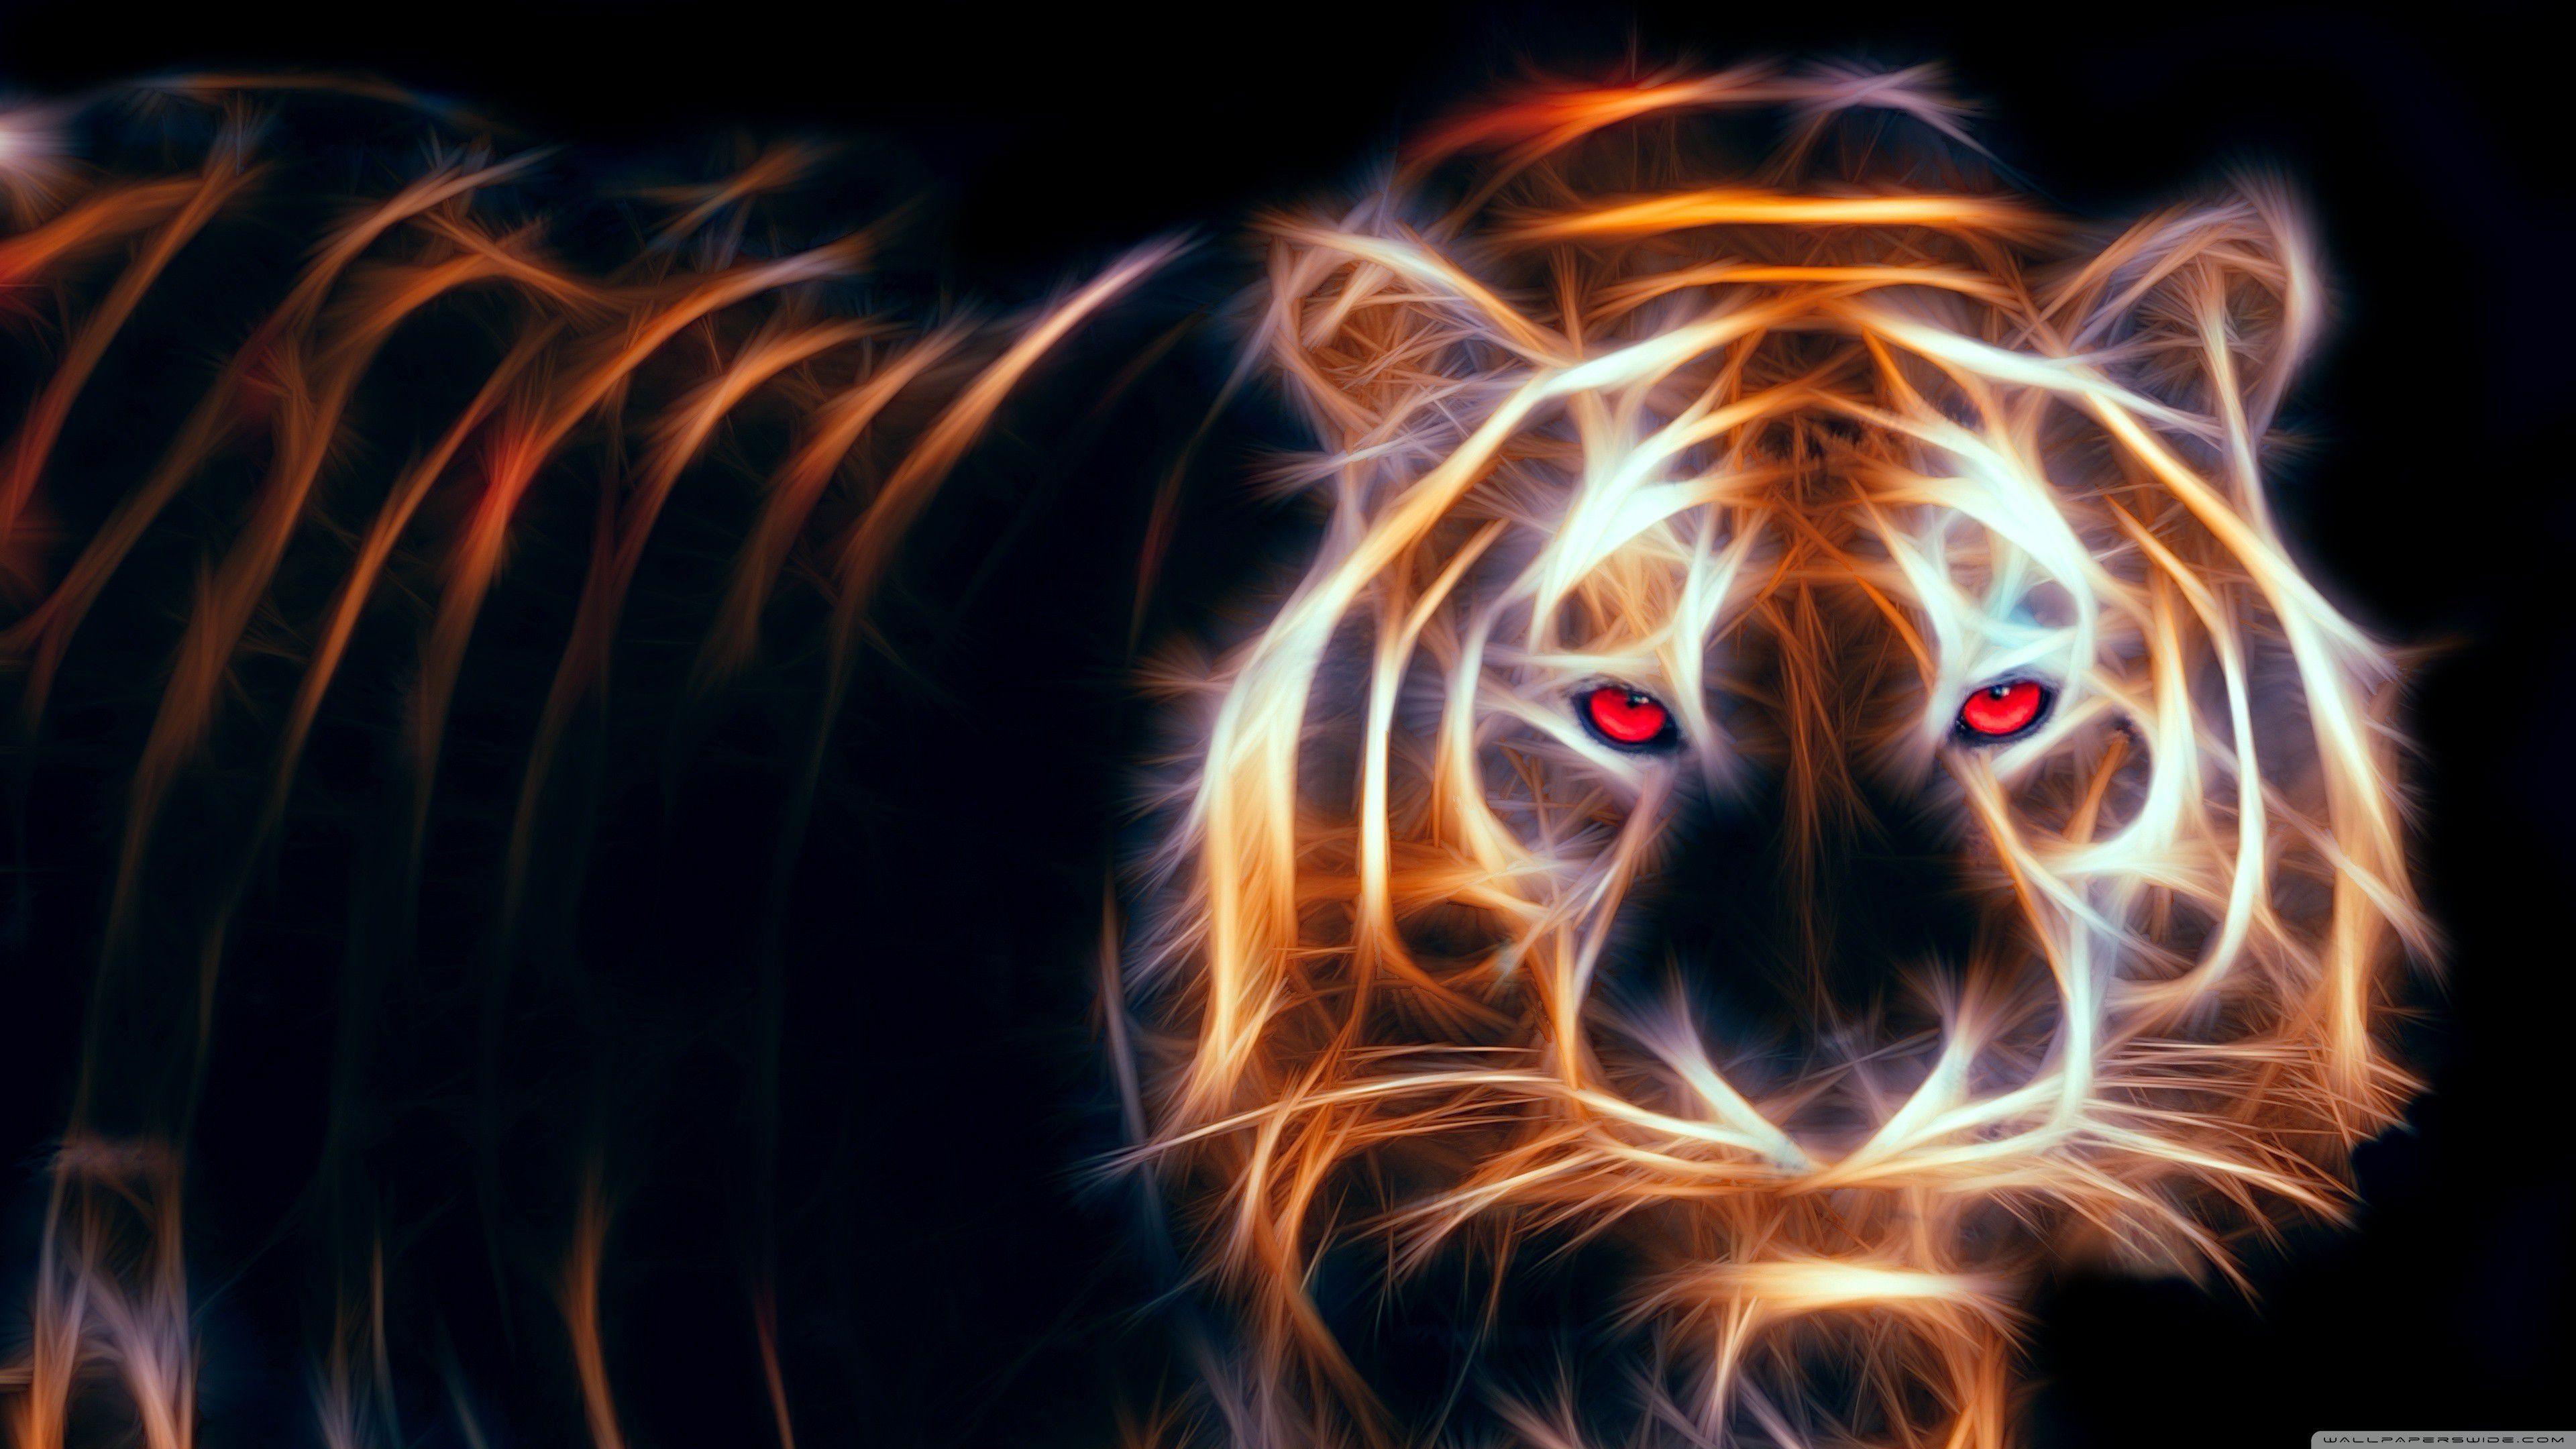 Fire Tiger Wallpaper Free Fire Tiger Background